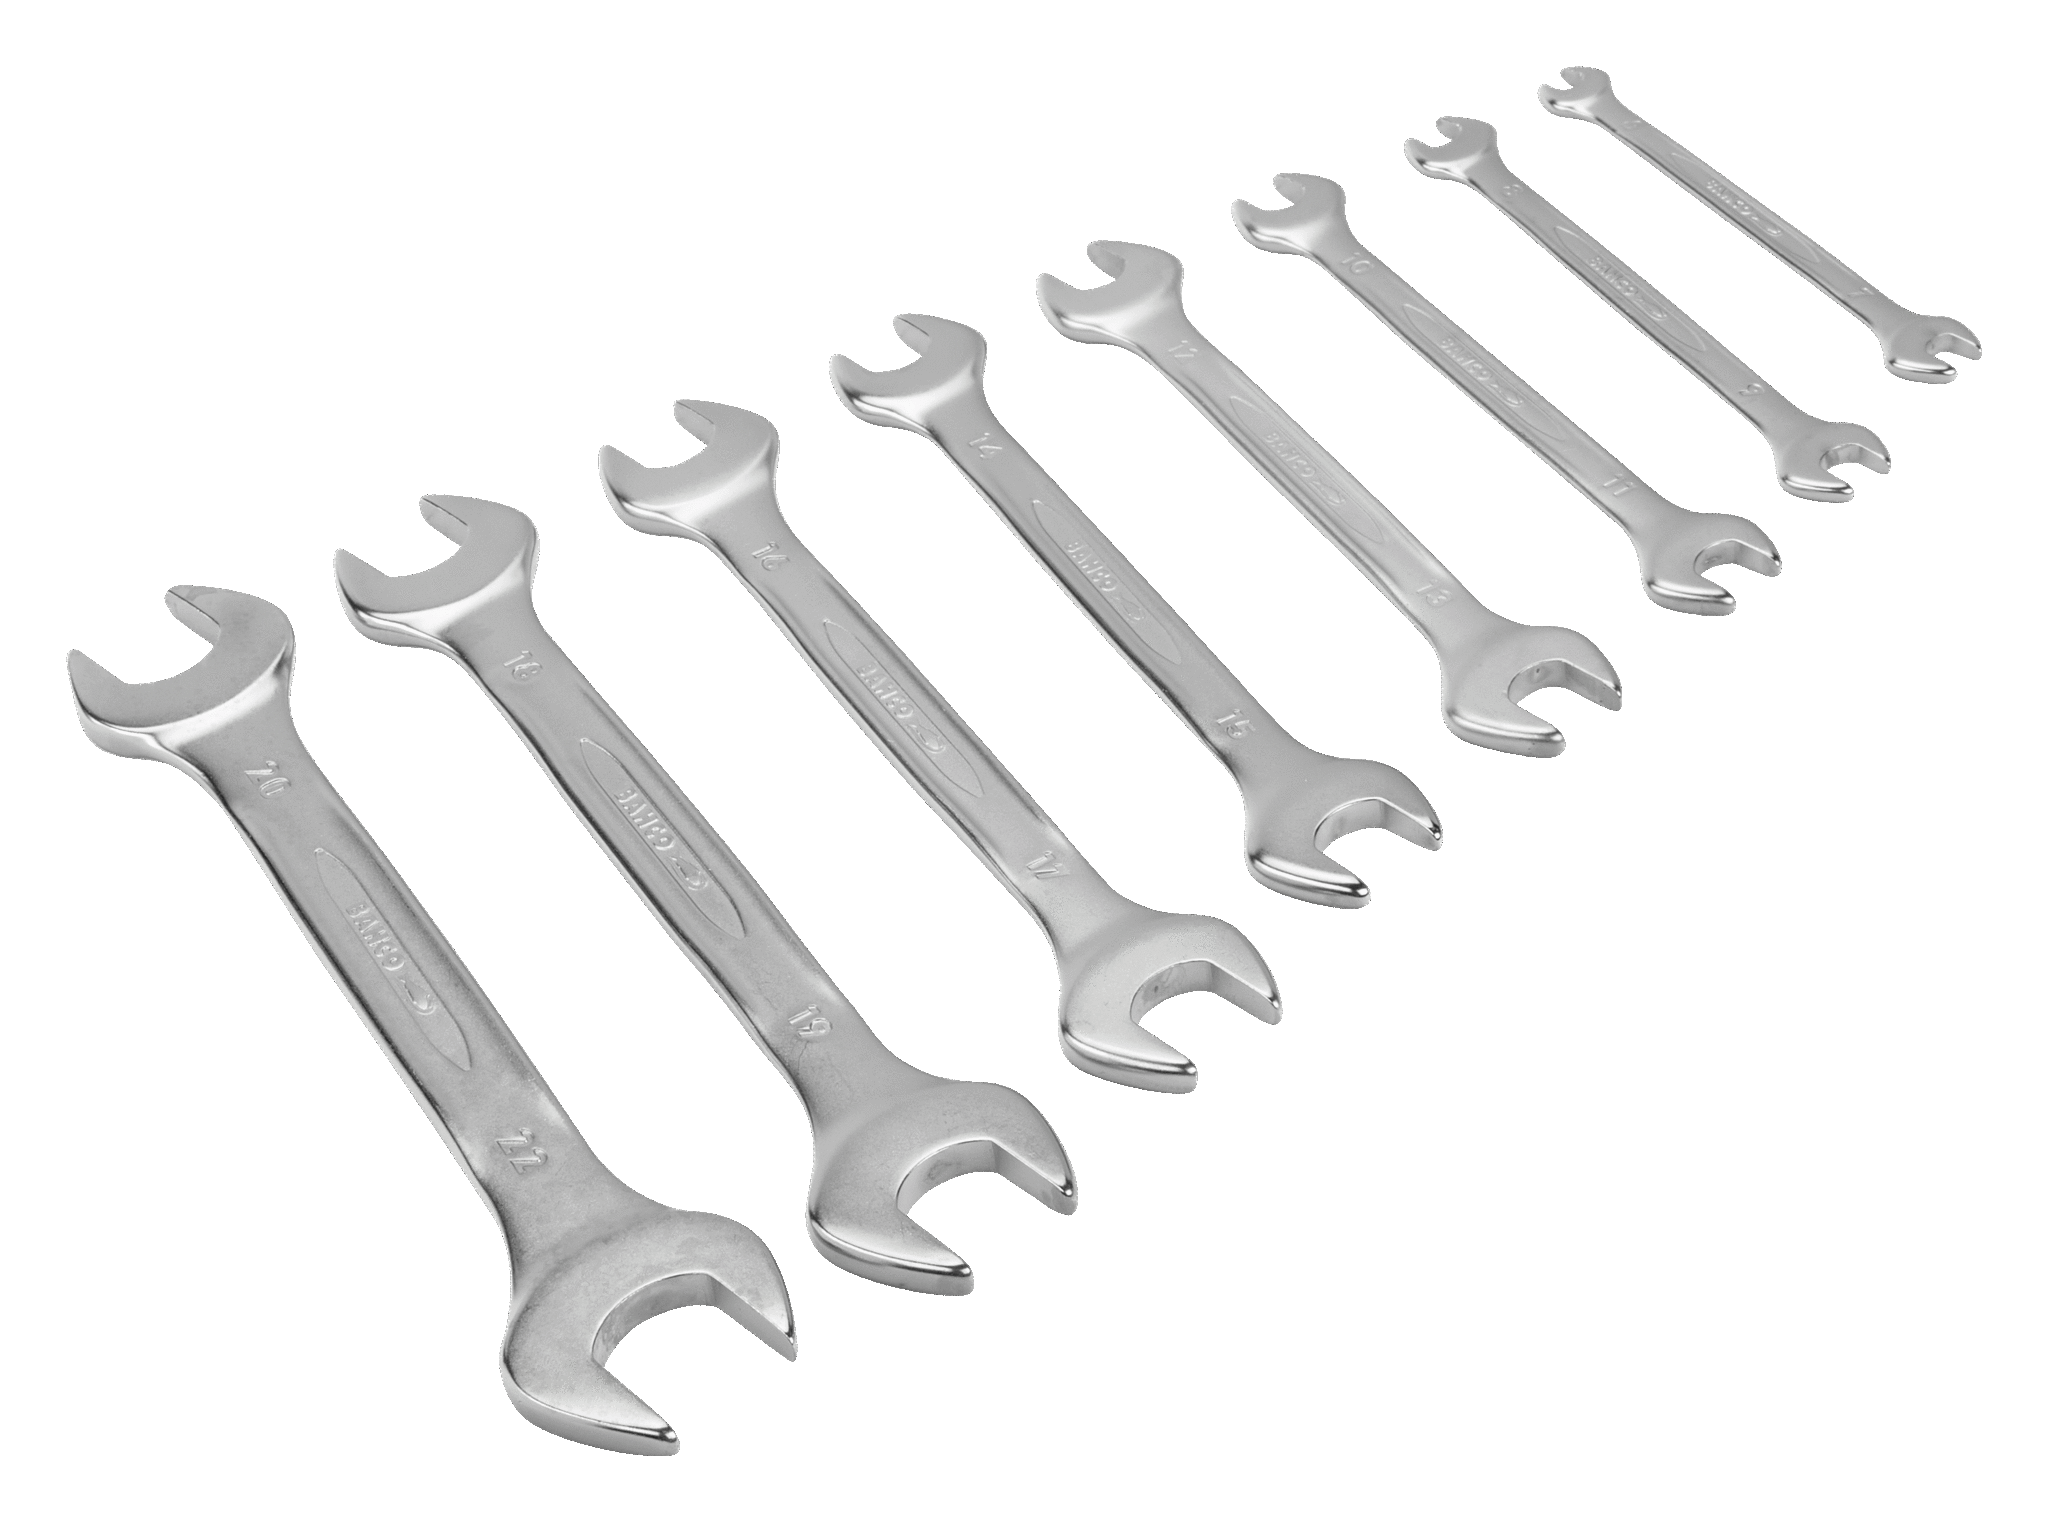 Metric Double Open End Wrench Set - 8 Pcs/Box | BAHCO | Bahco